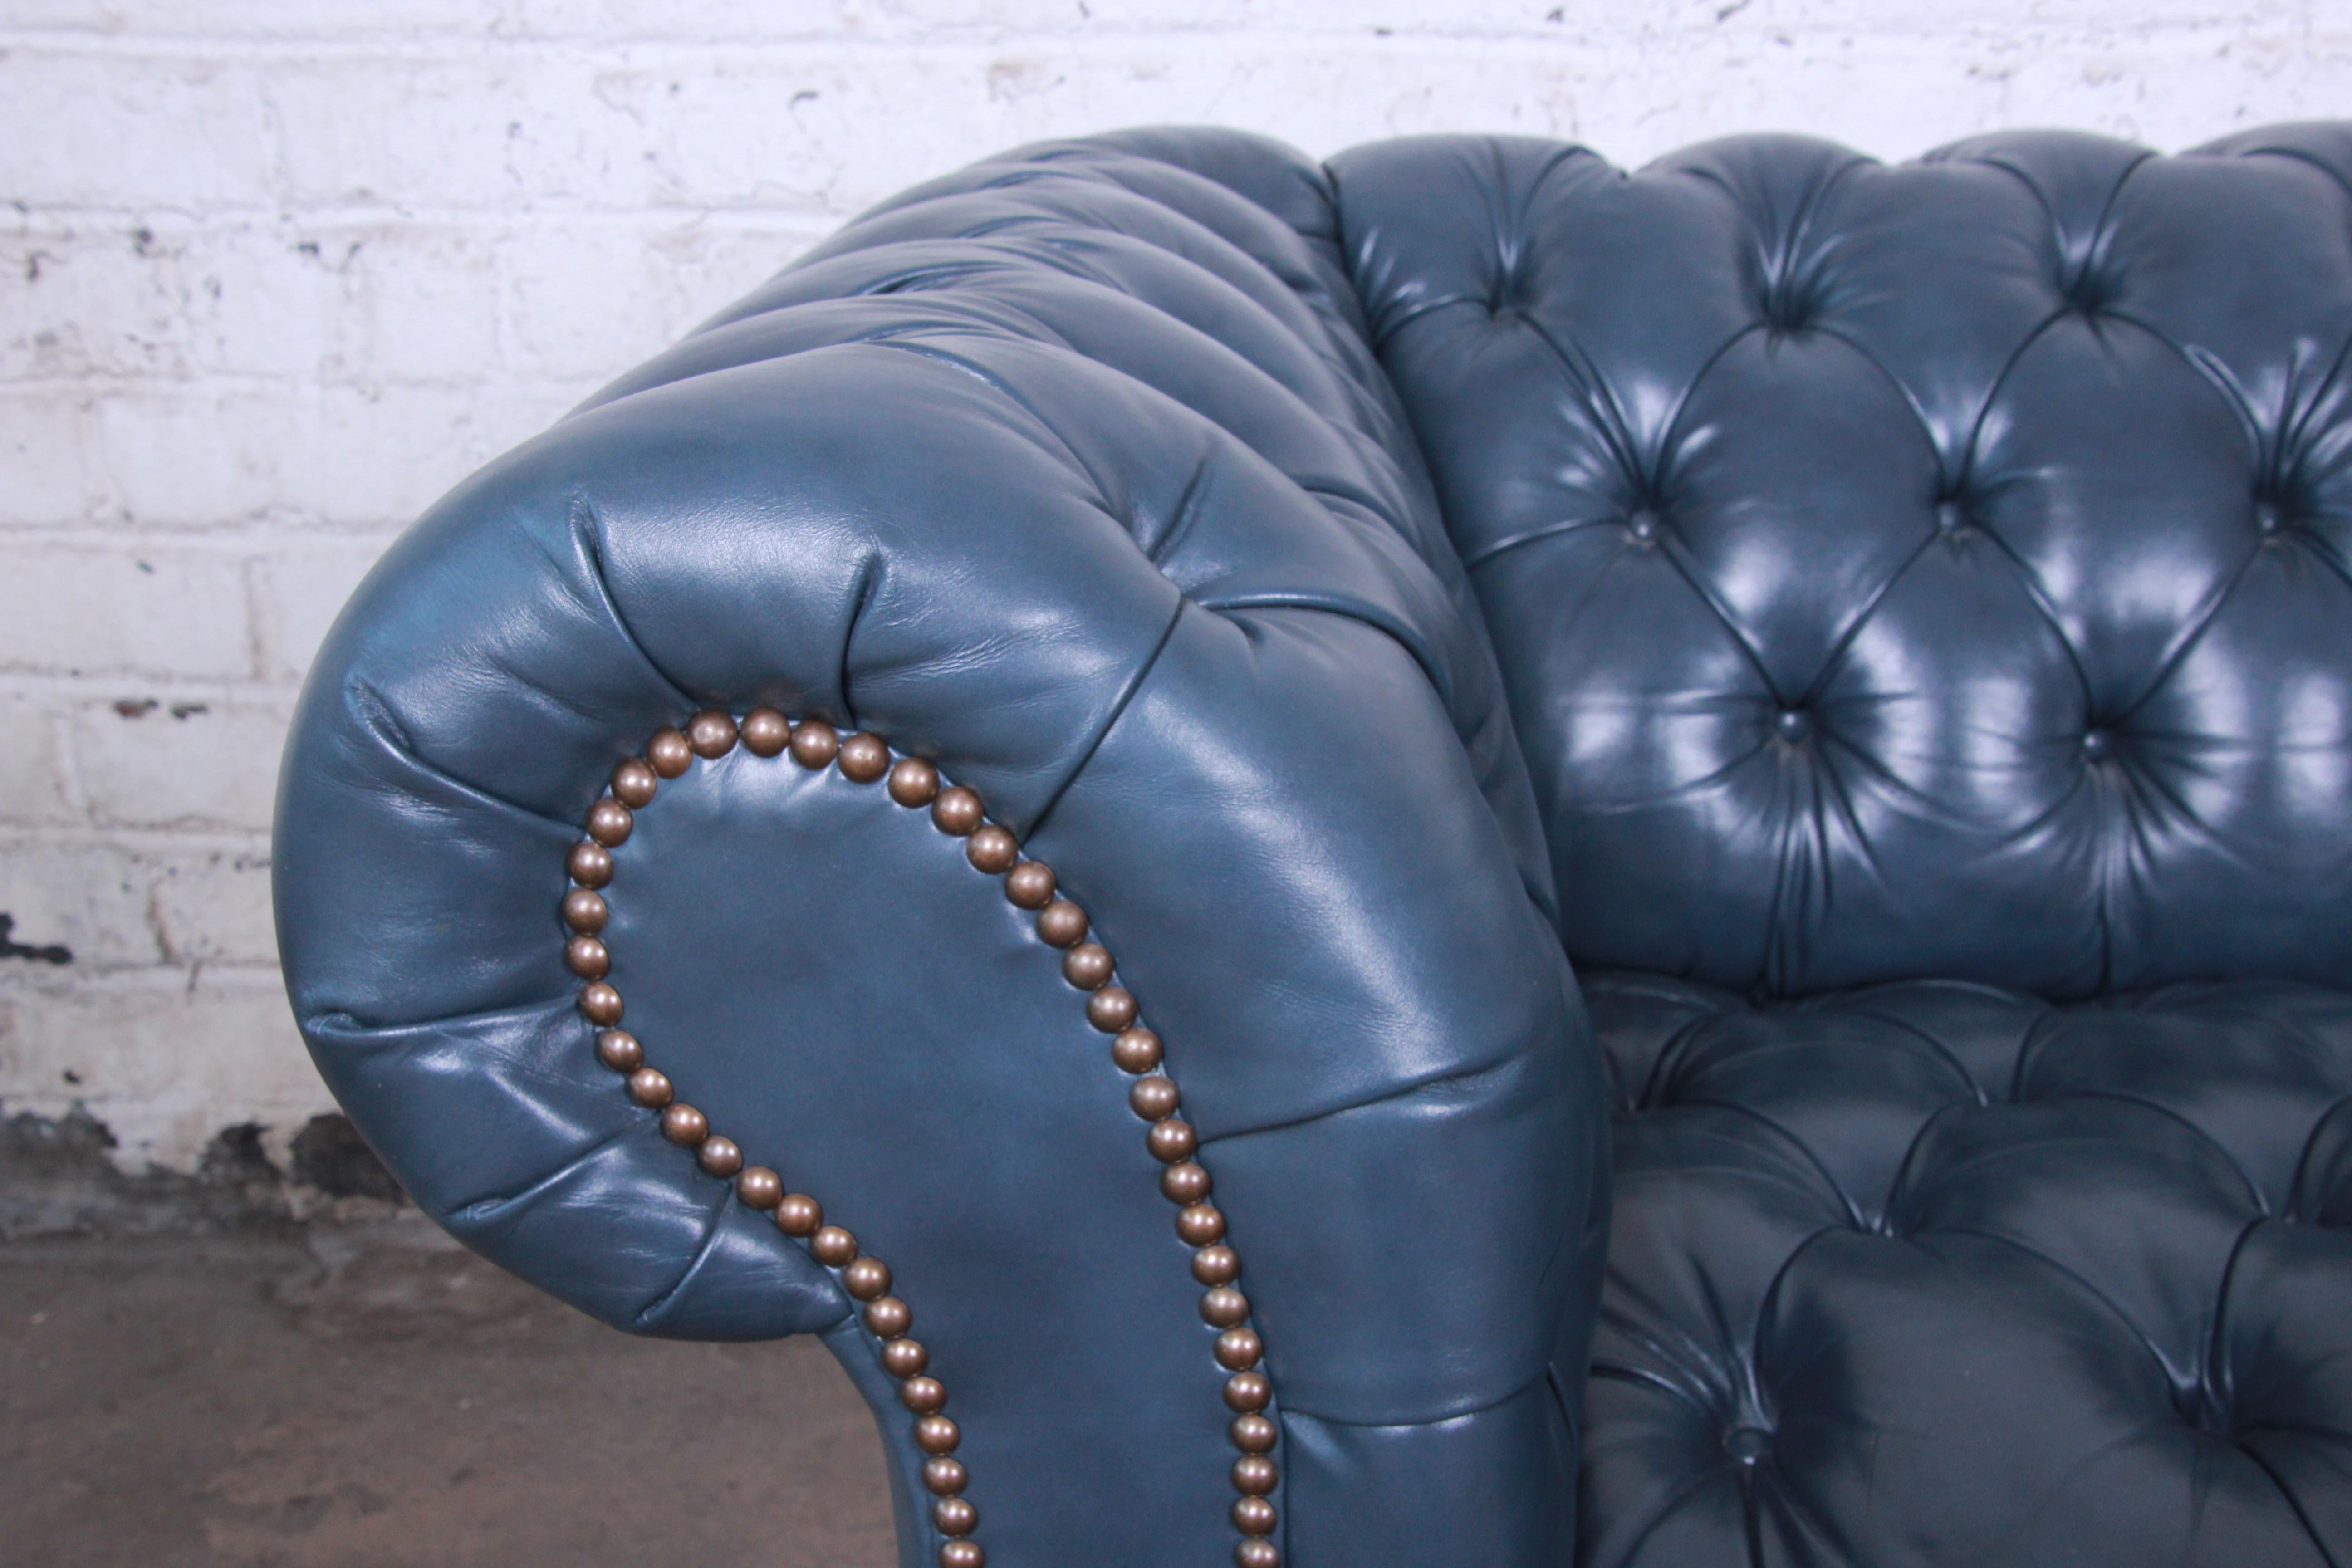 American Vintage Tufted Blue Leather Chesterfield Sofa